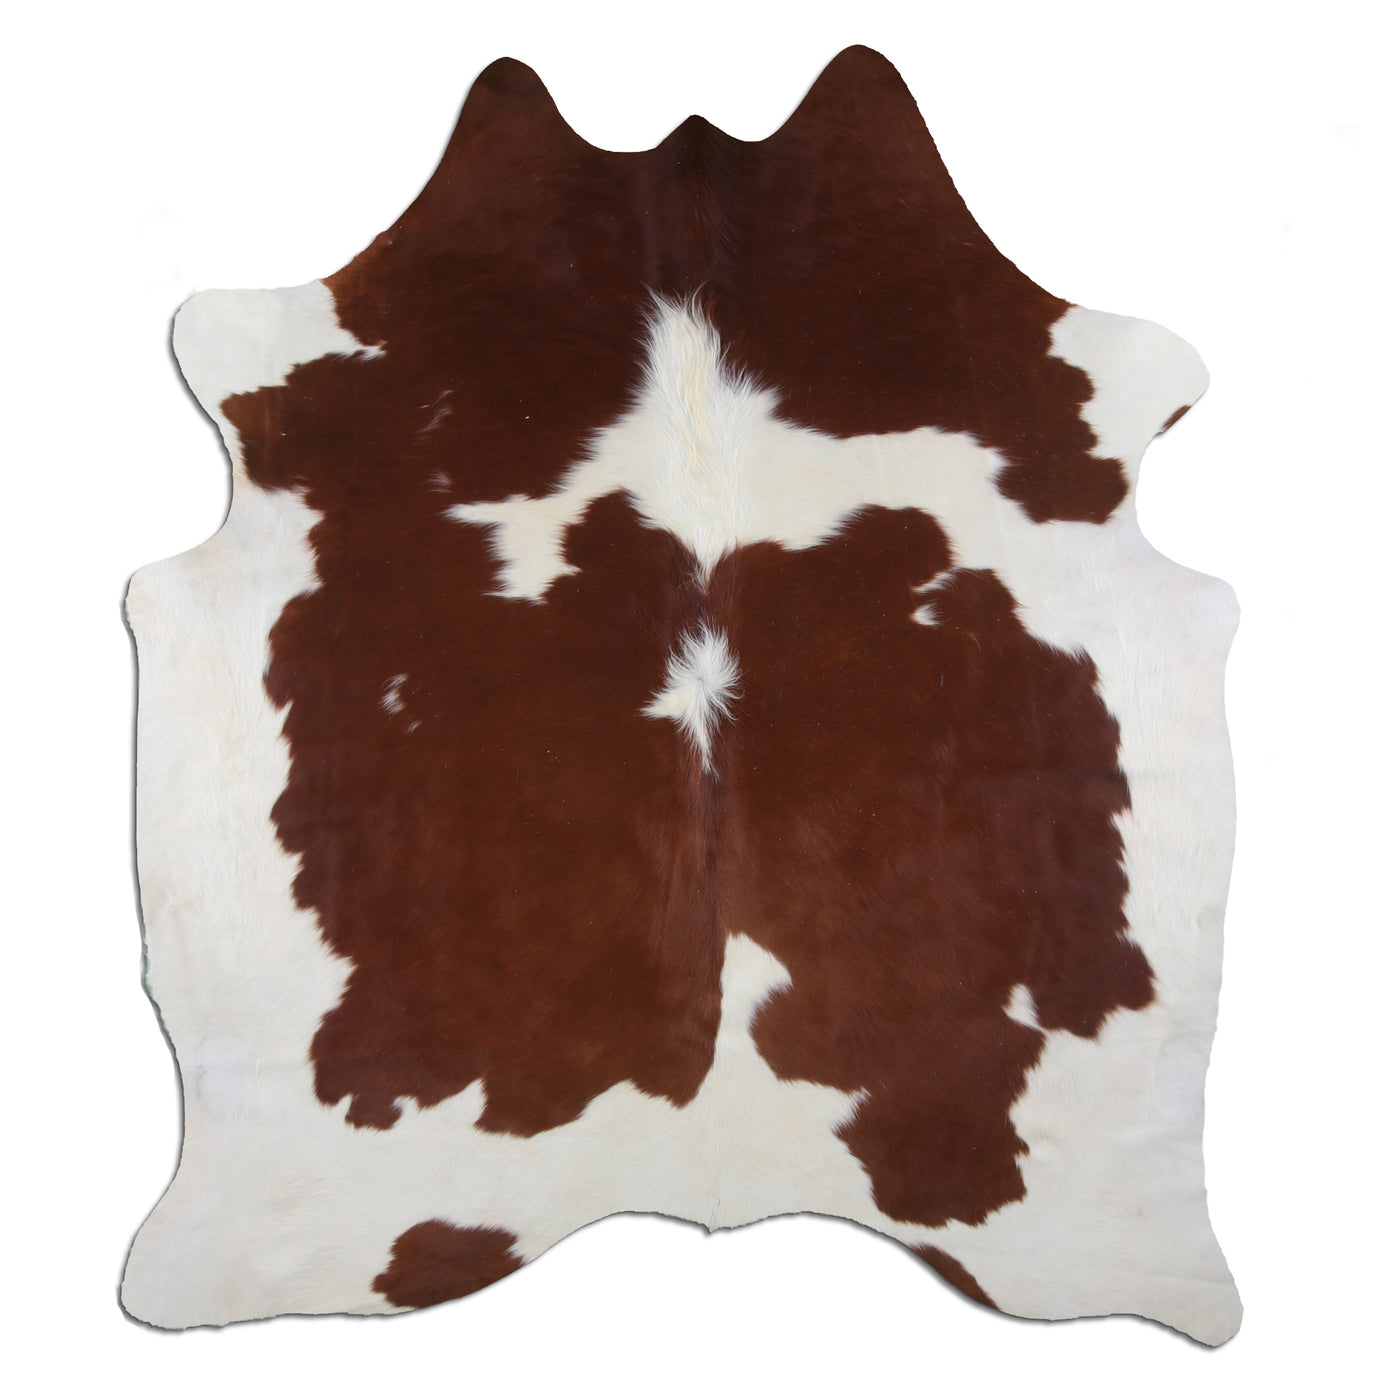 Real Leather Cowhide Cow 18 by Rug Factory Plus